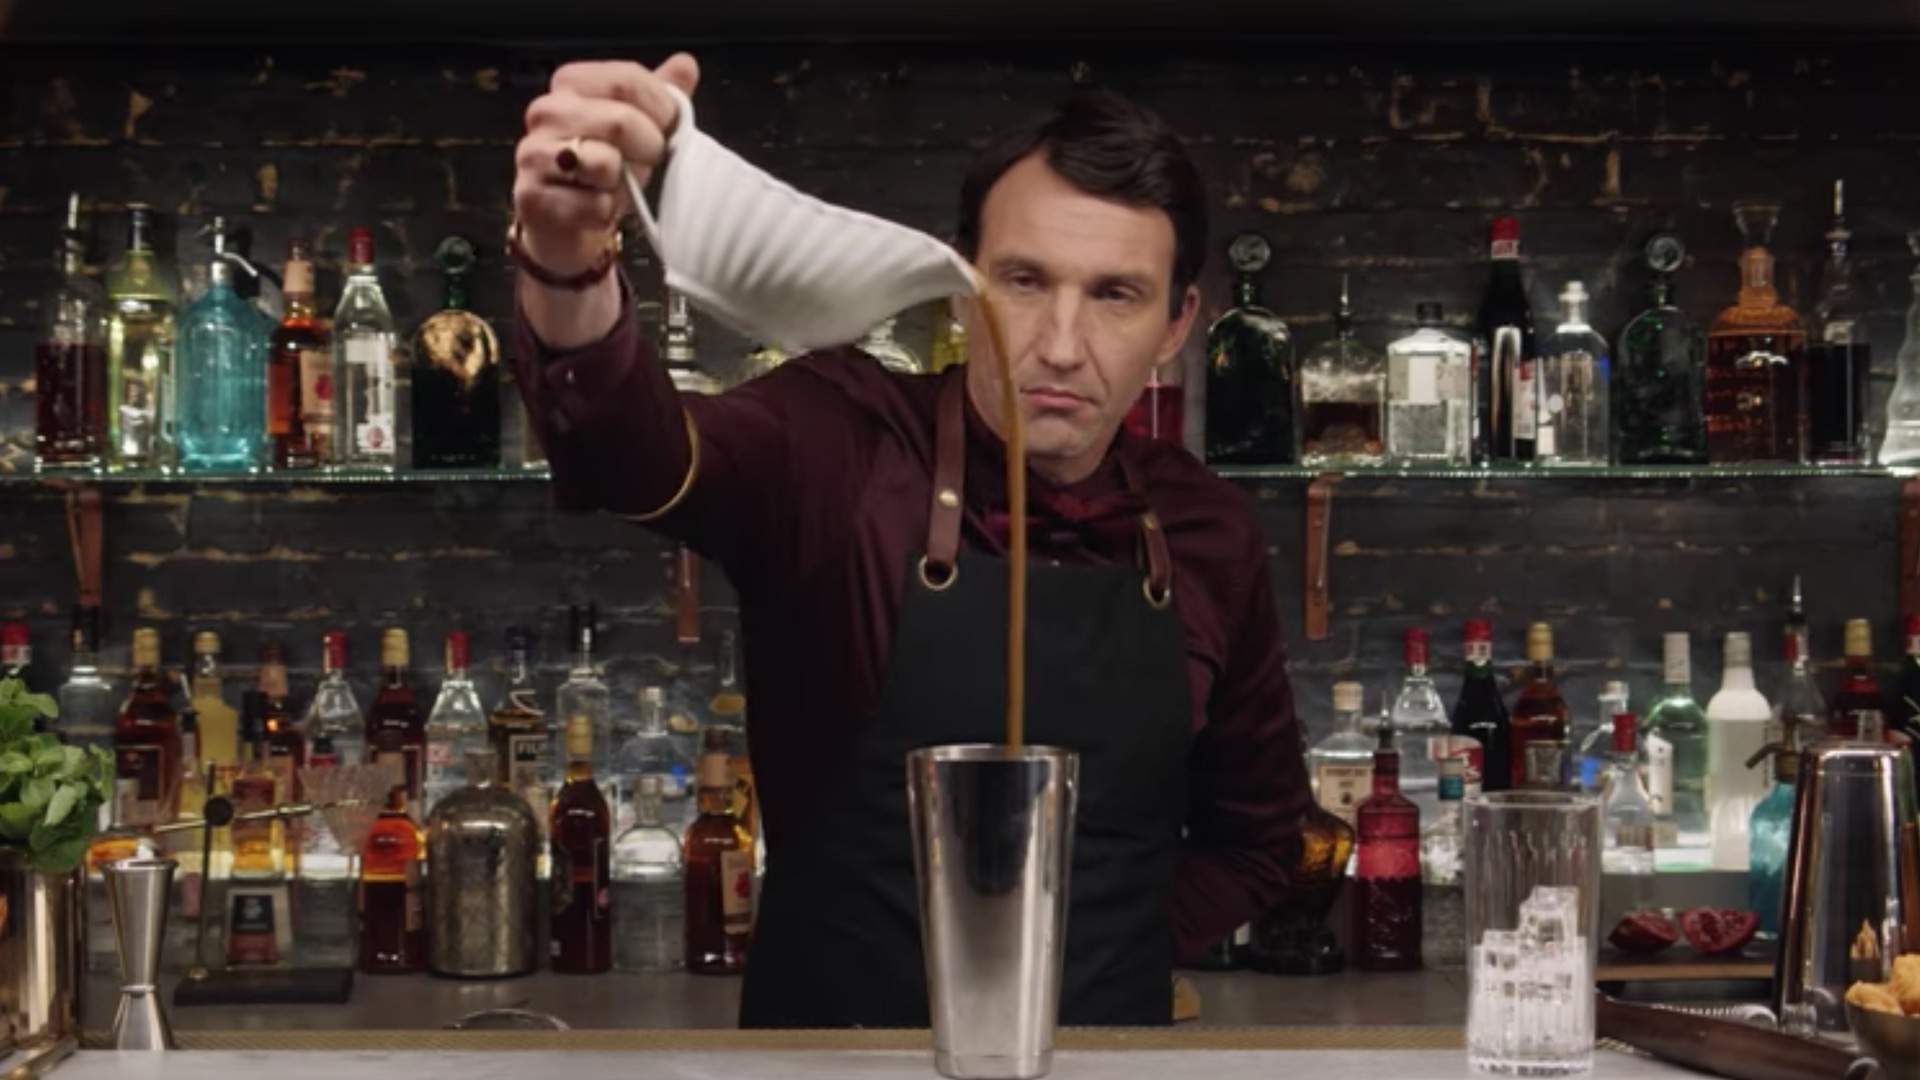 KFC Cocktails Are the New Thing for People Who Like to Drink Their Gravy